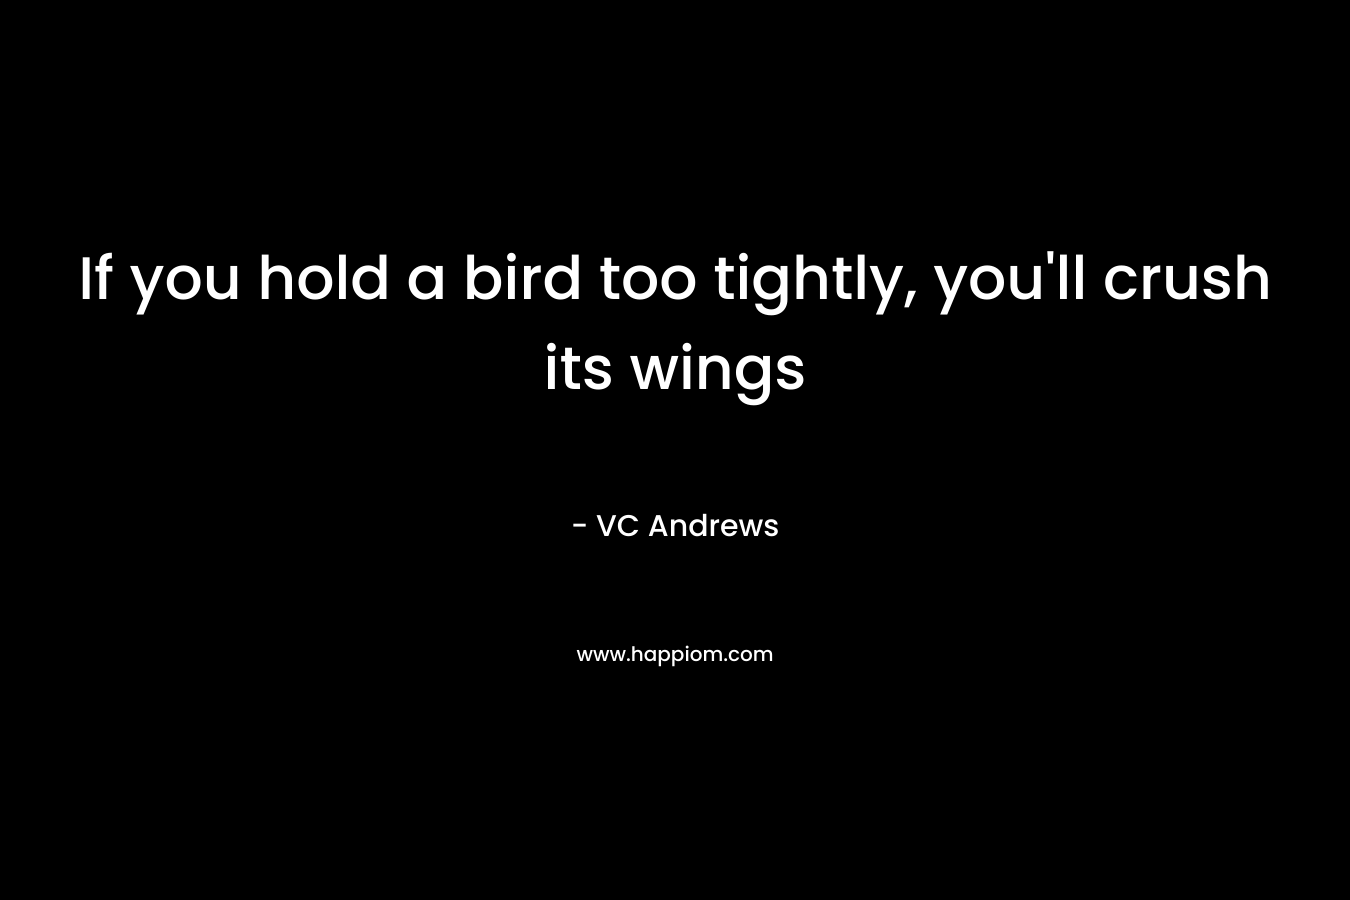 If you hold a bird too tightly, you’ll crush its wings – VC Andrews